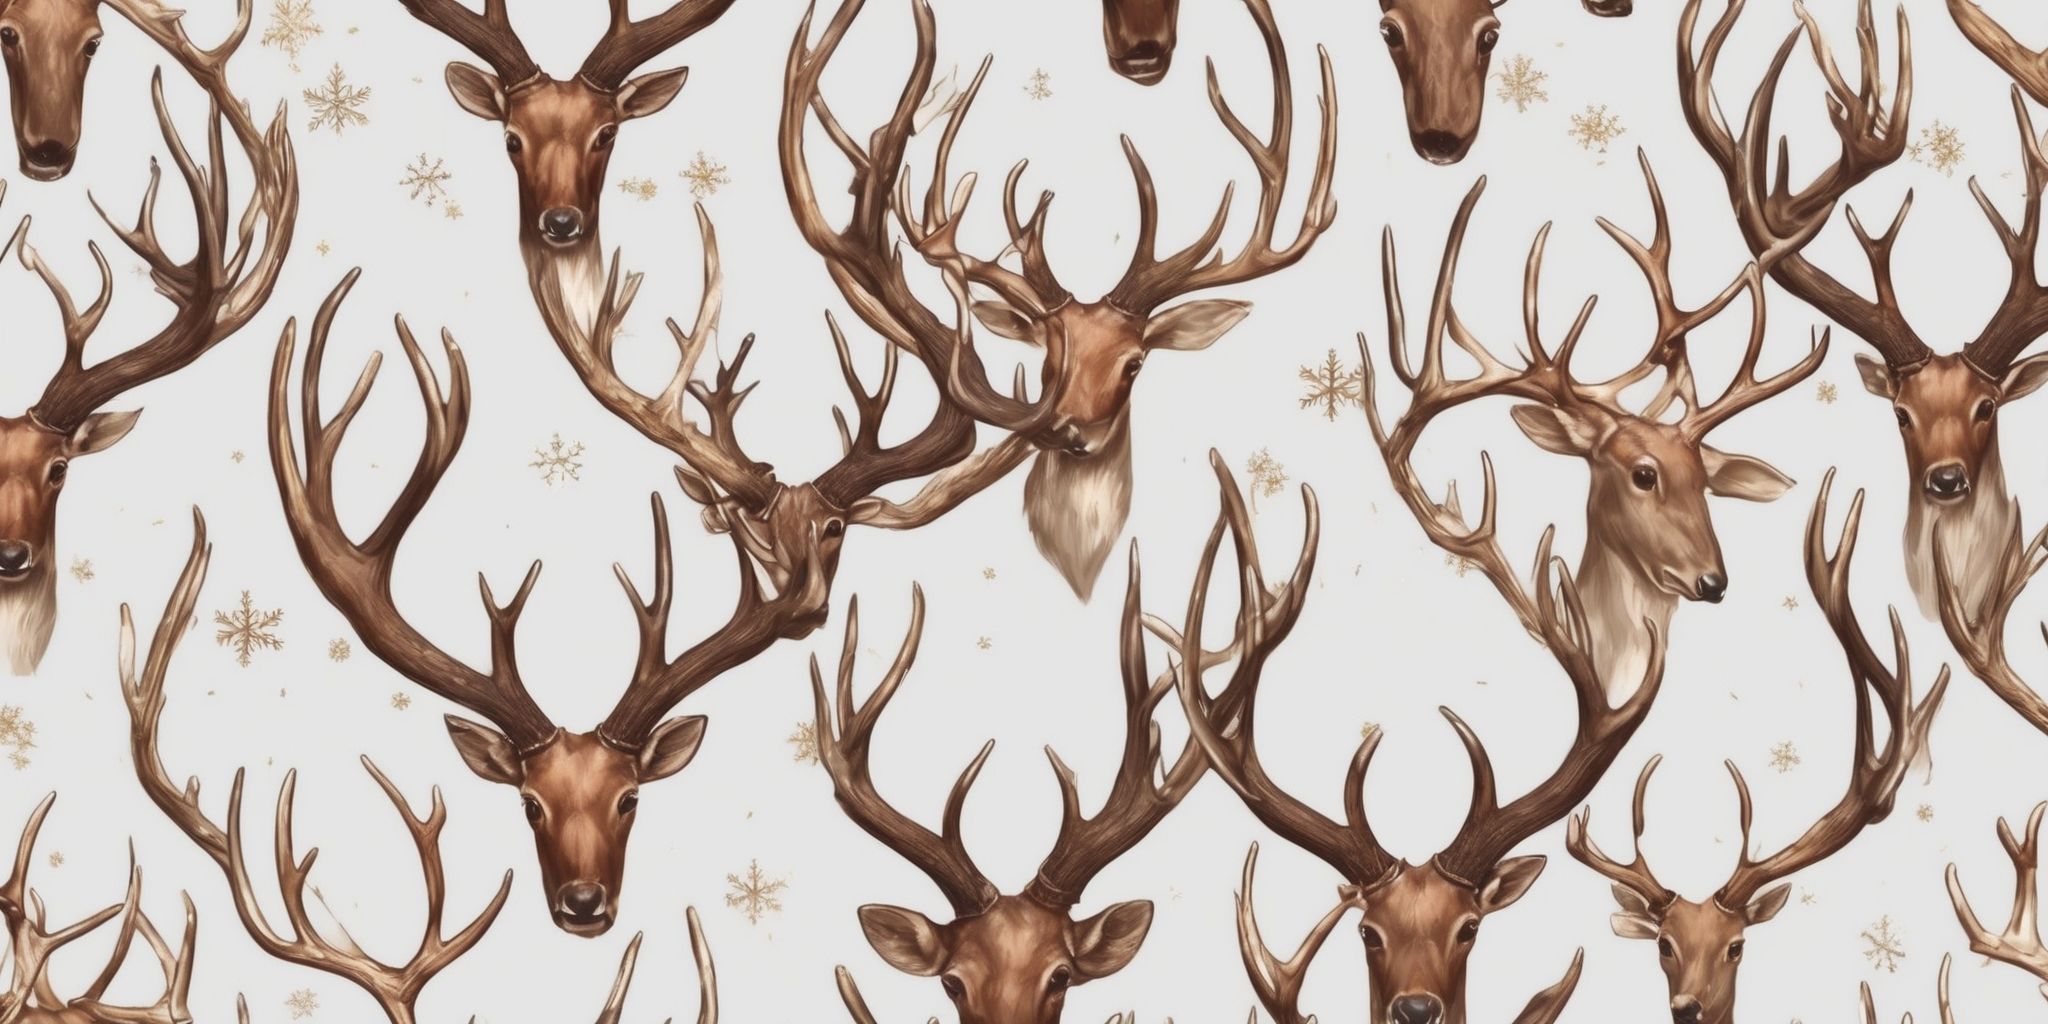 Antlers in realistic Christmas style